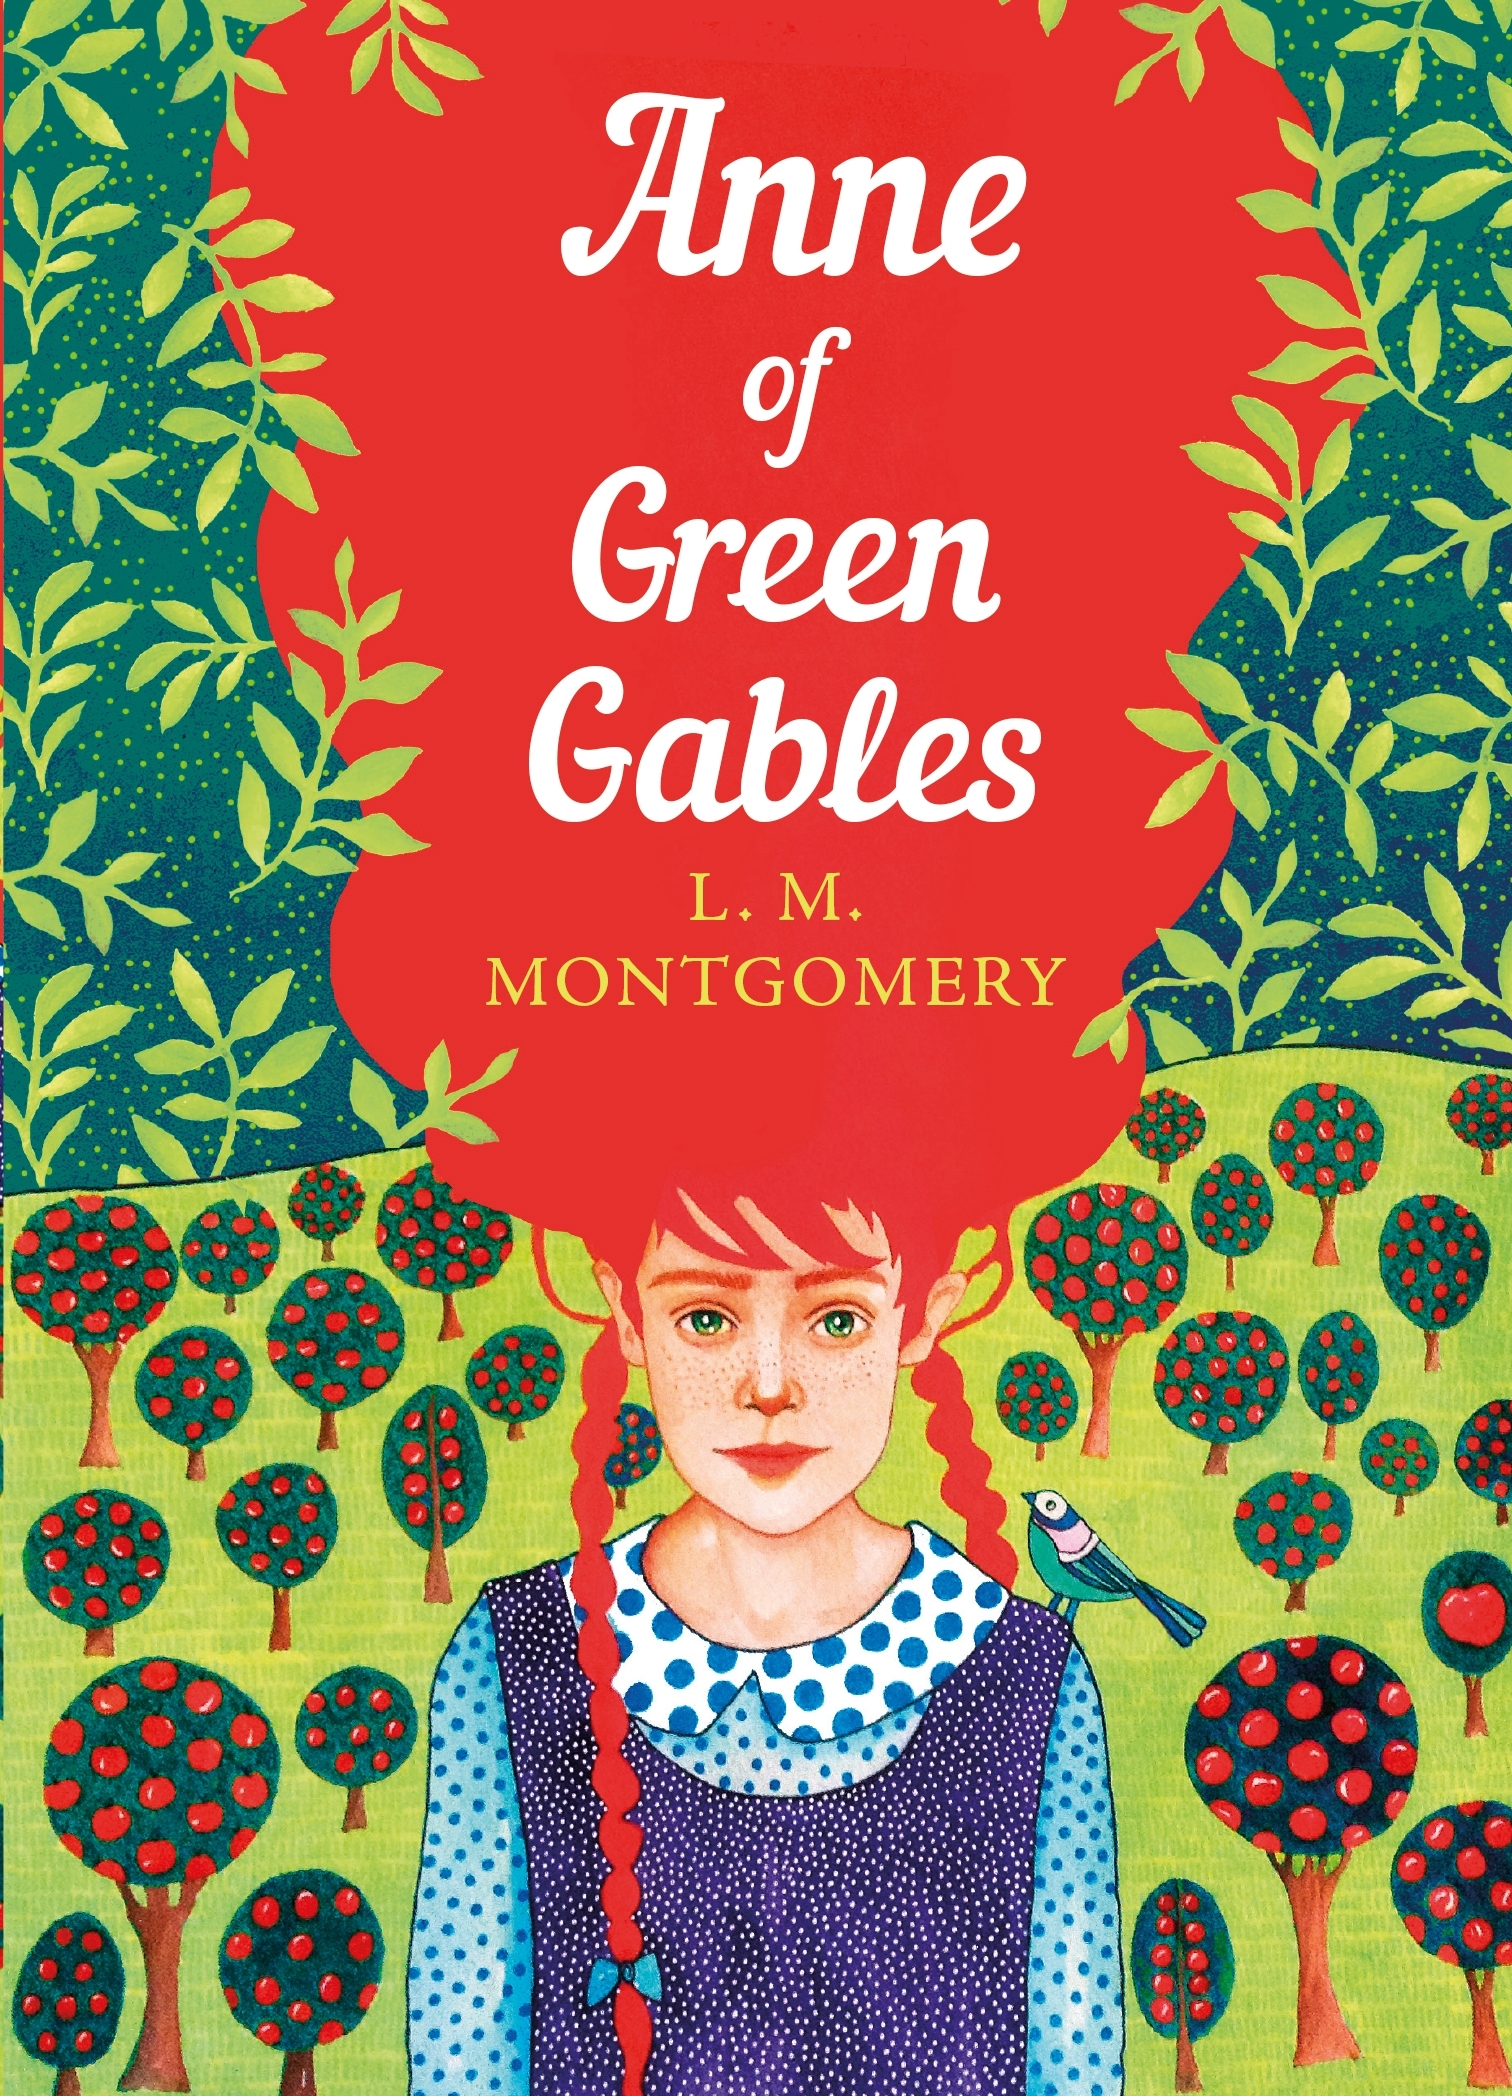 book review of anne of green gables